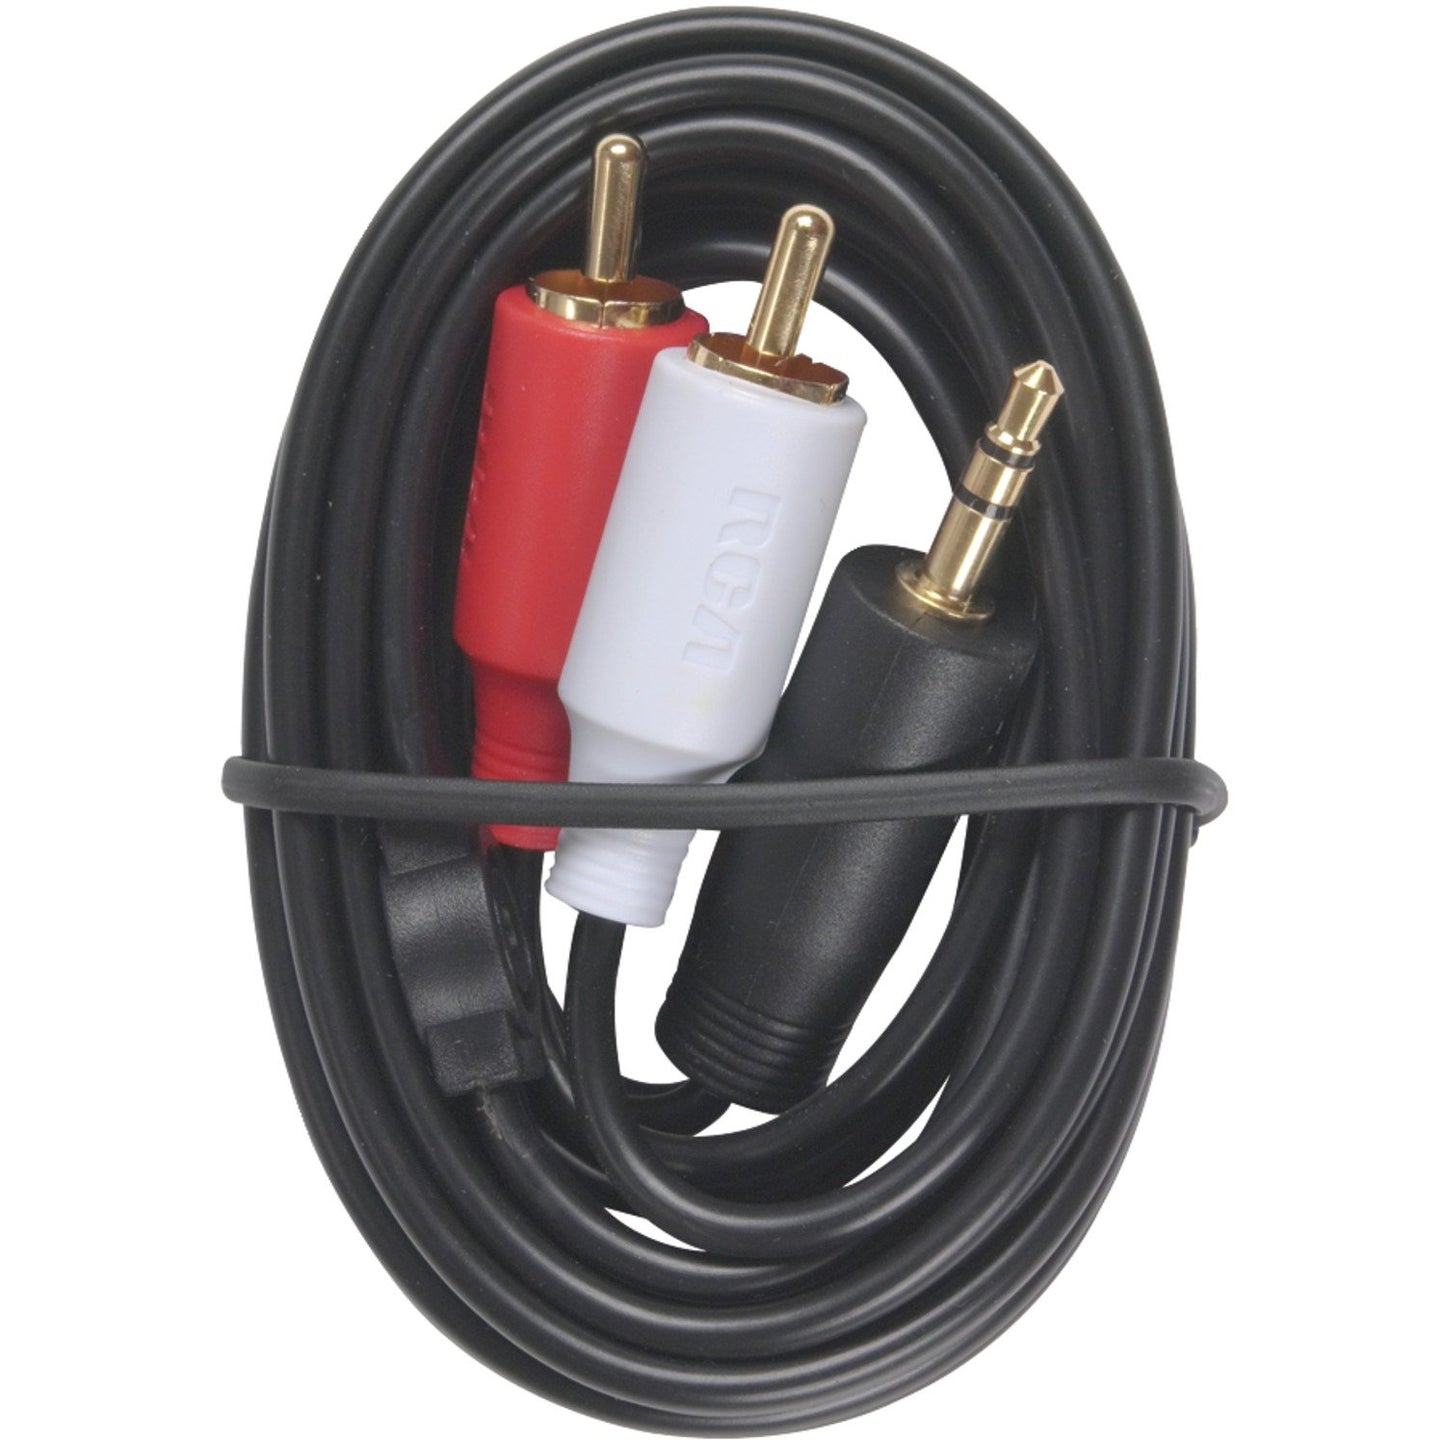 RCA AH205R MP3 3.5mm to 2 RCA Plugs Y-Adapter, 3ft